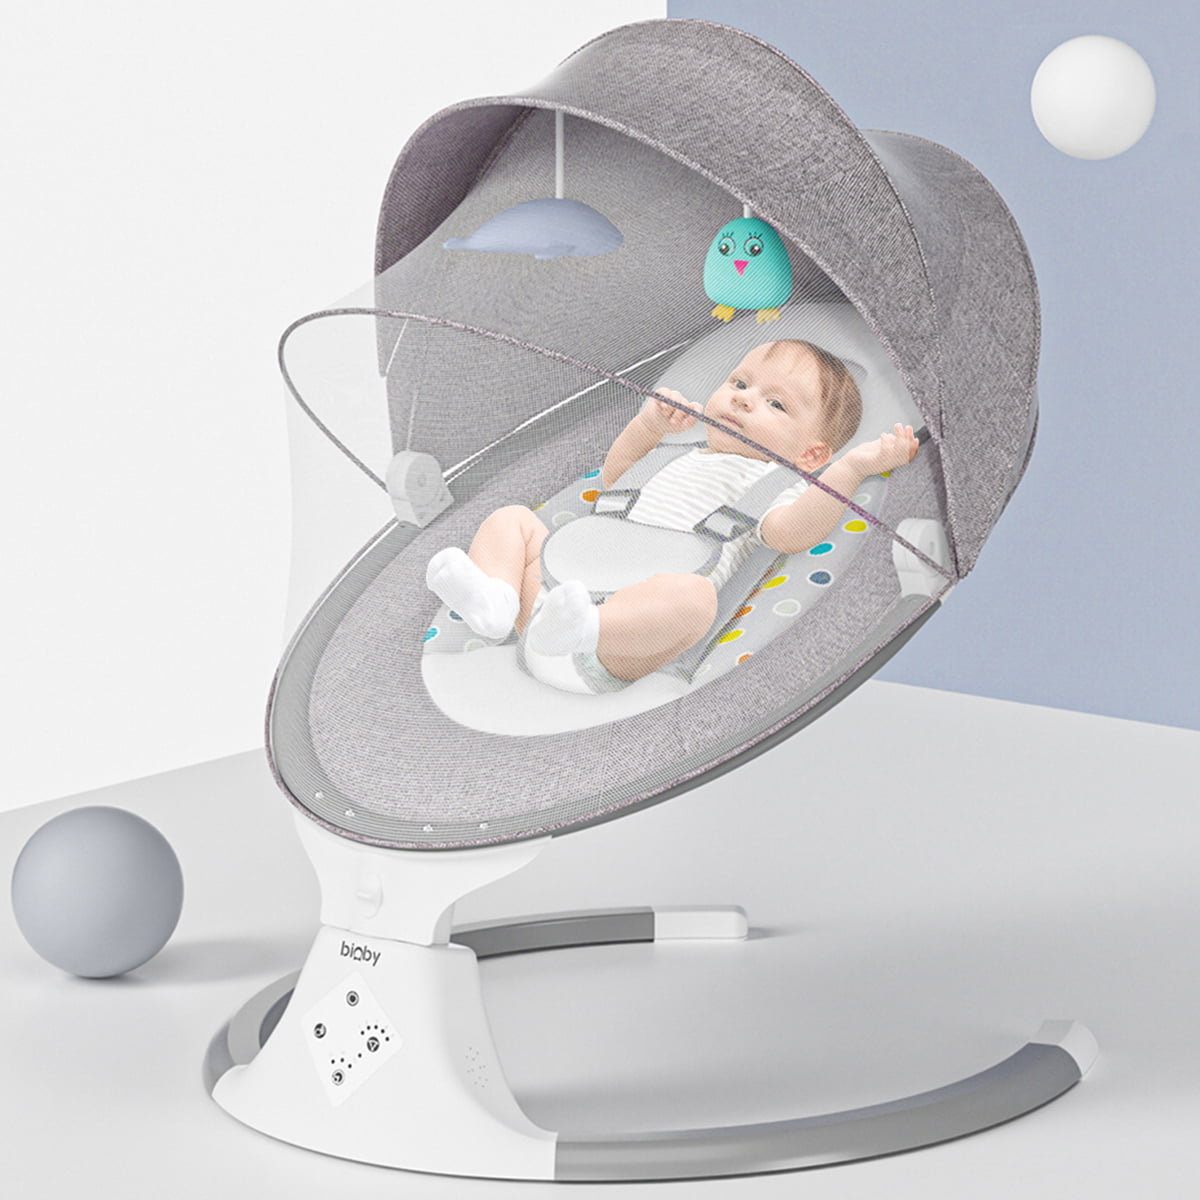 BIOBY Baby Swing, Baby Rocker, Electric Auto Swing Cradle with 5 Gears Time Set Music Swing Shaker Recliner